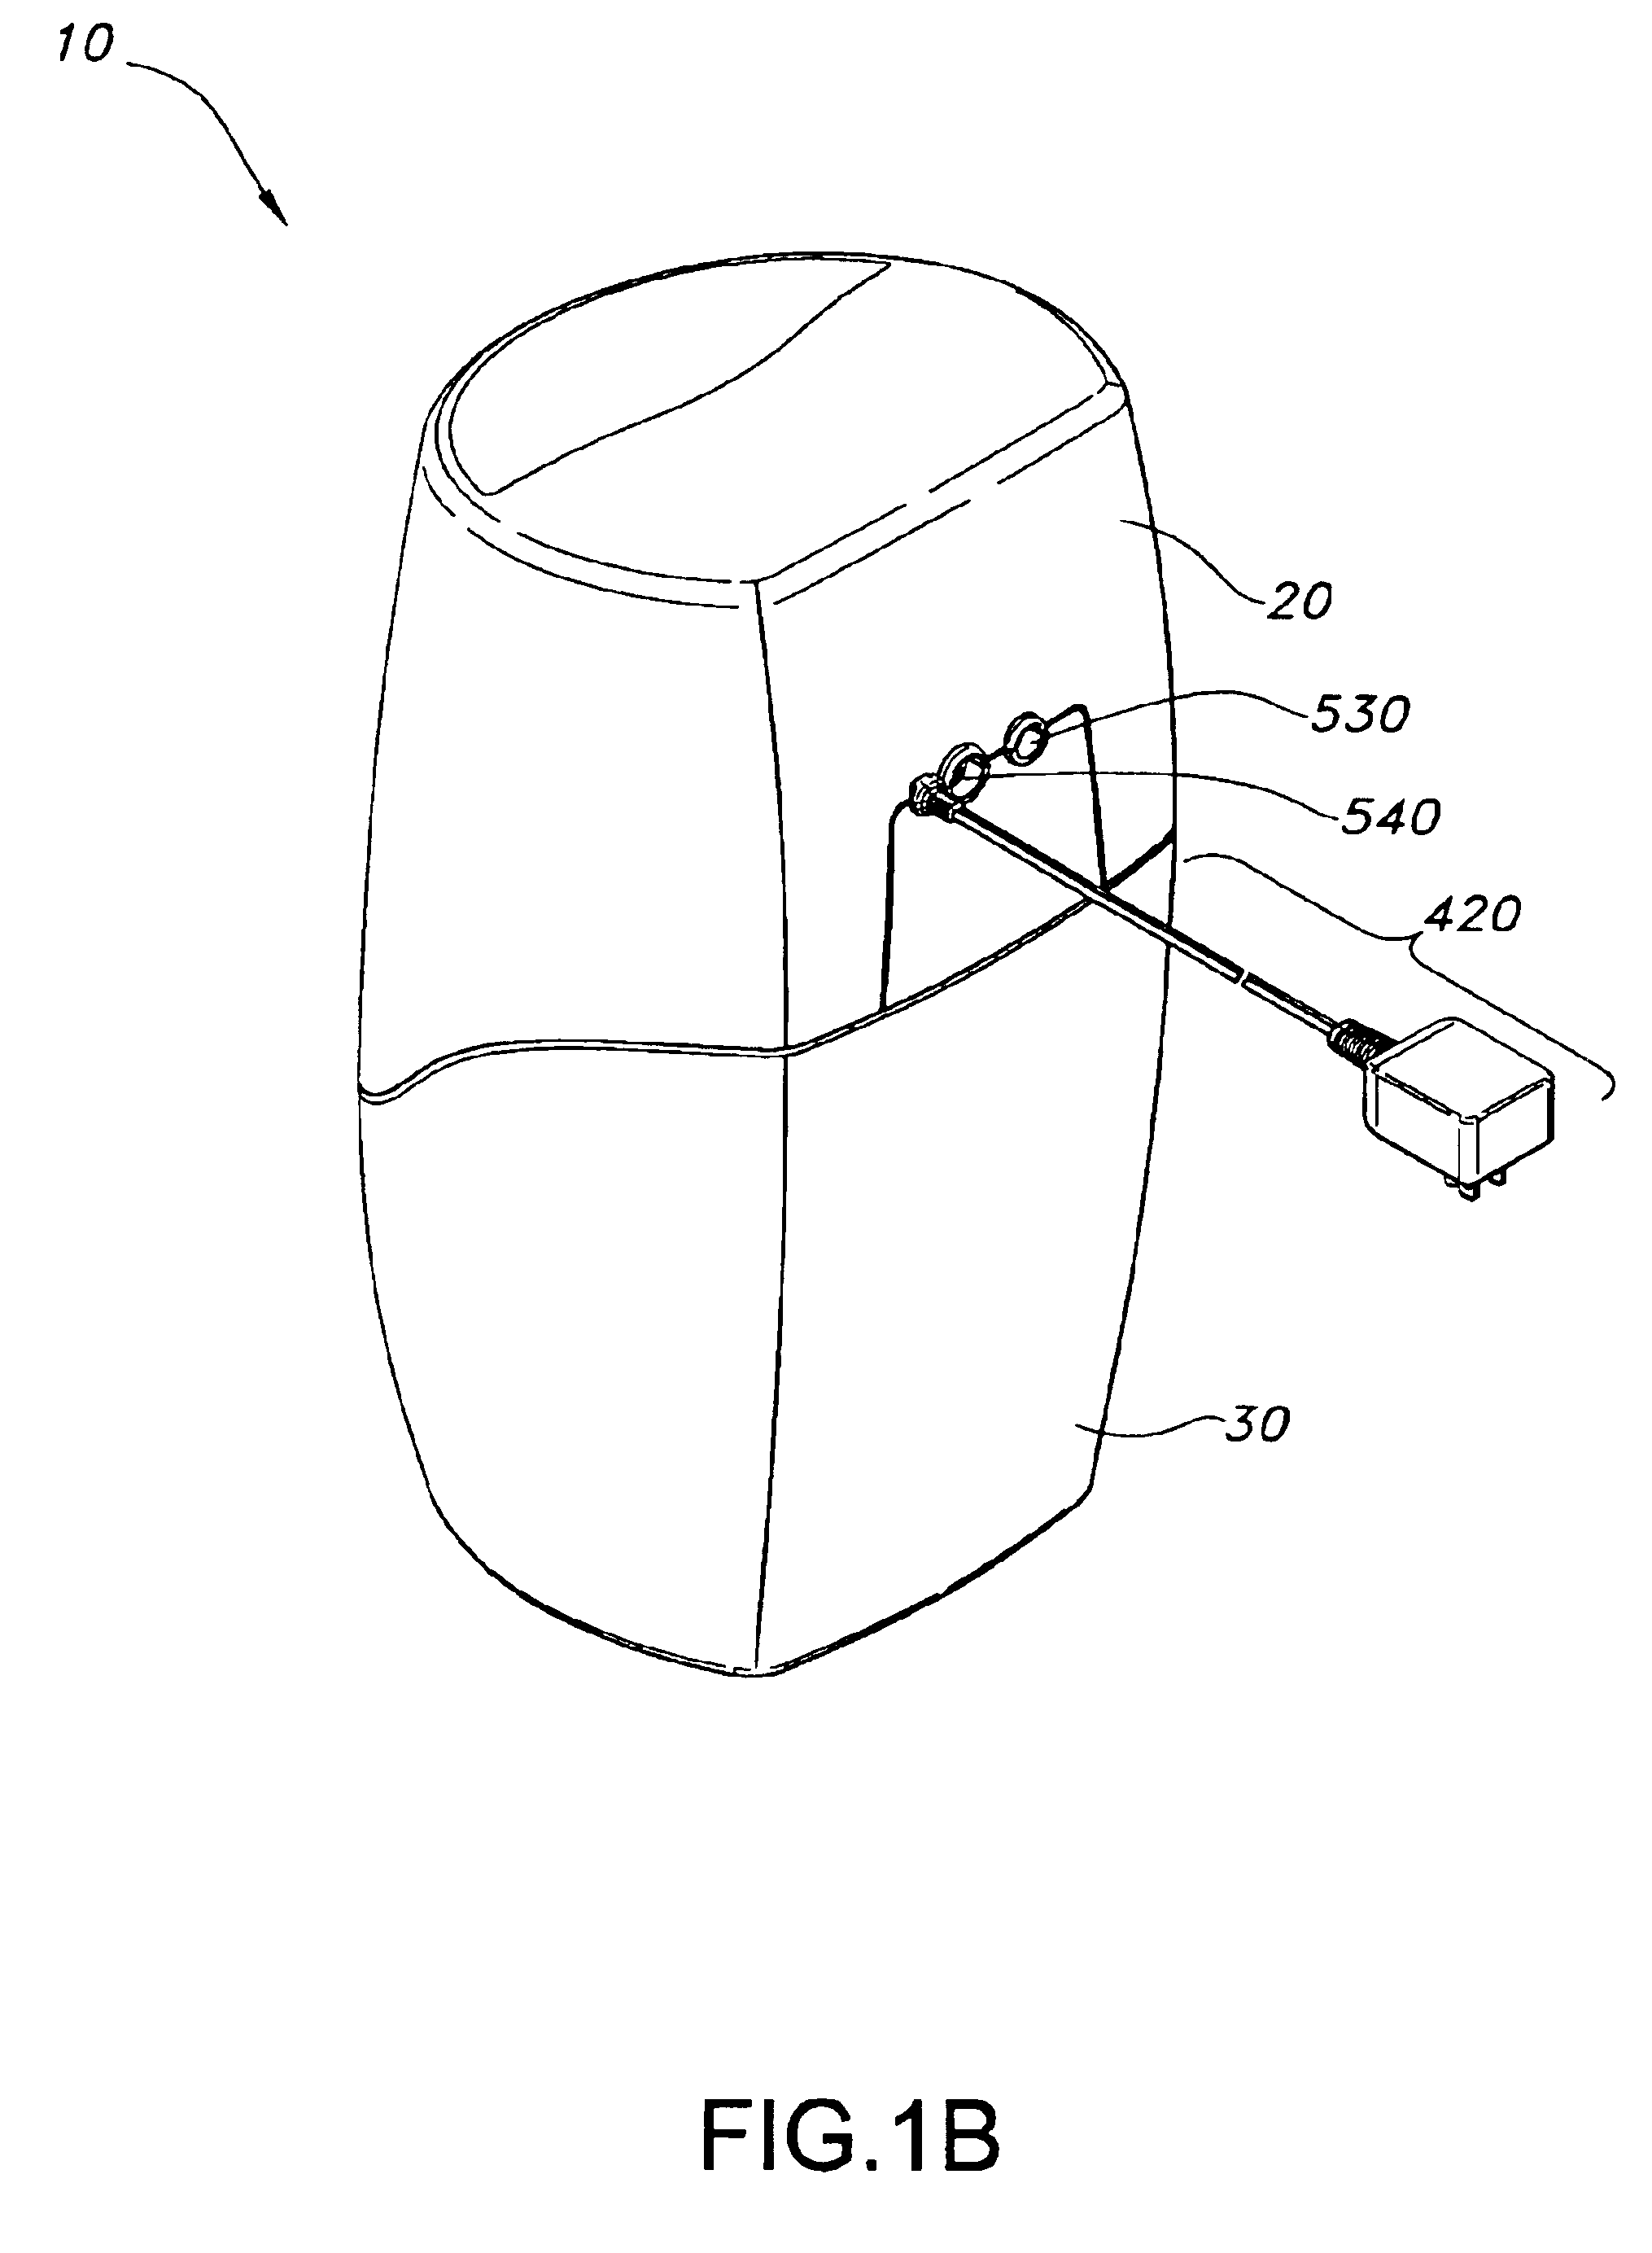 Removable closure assembly for a water treatment system